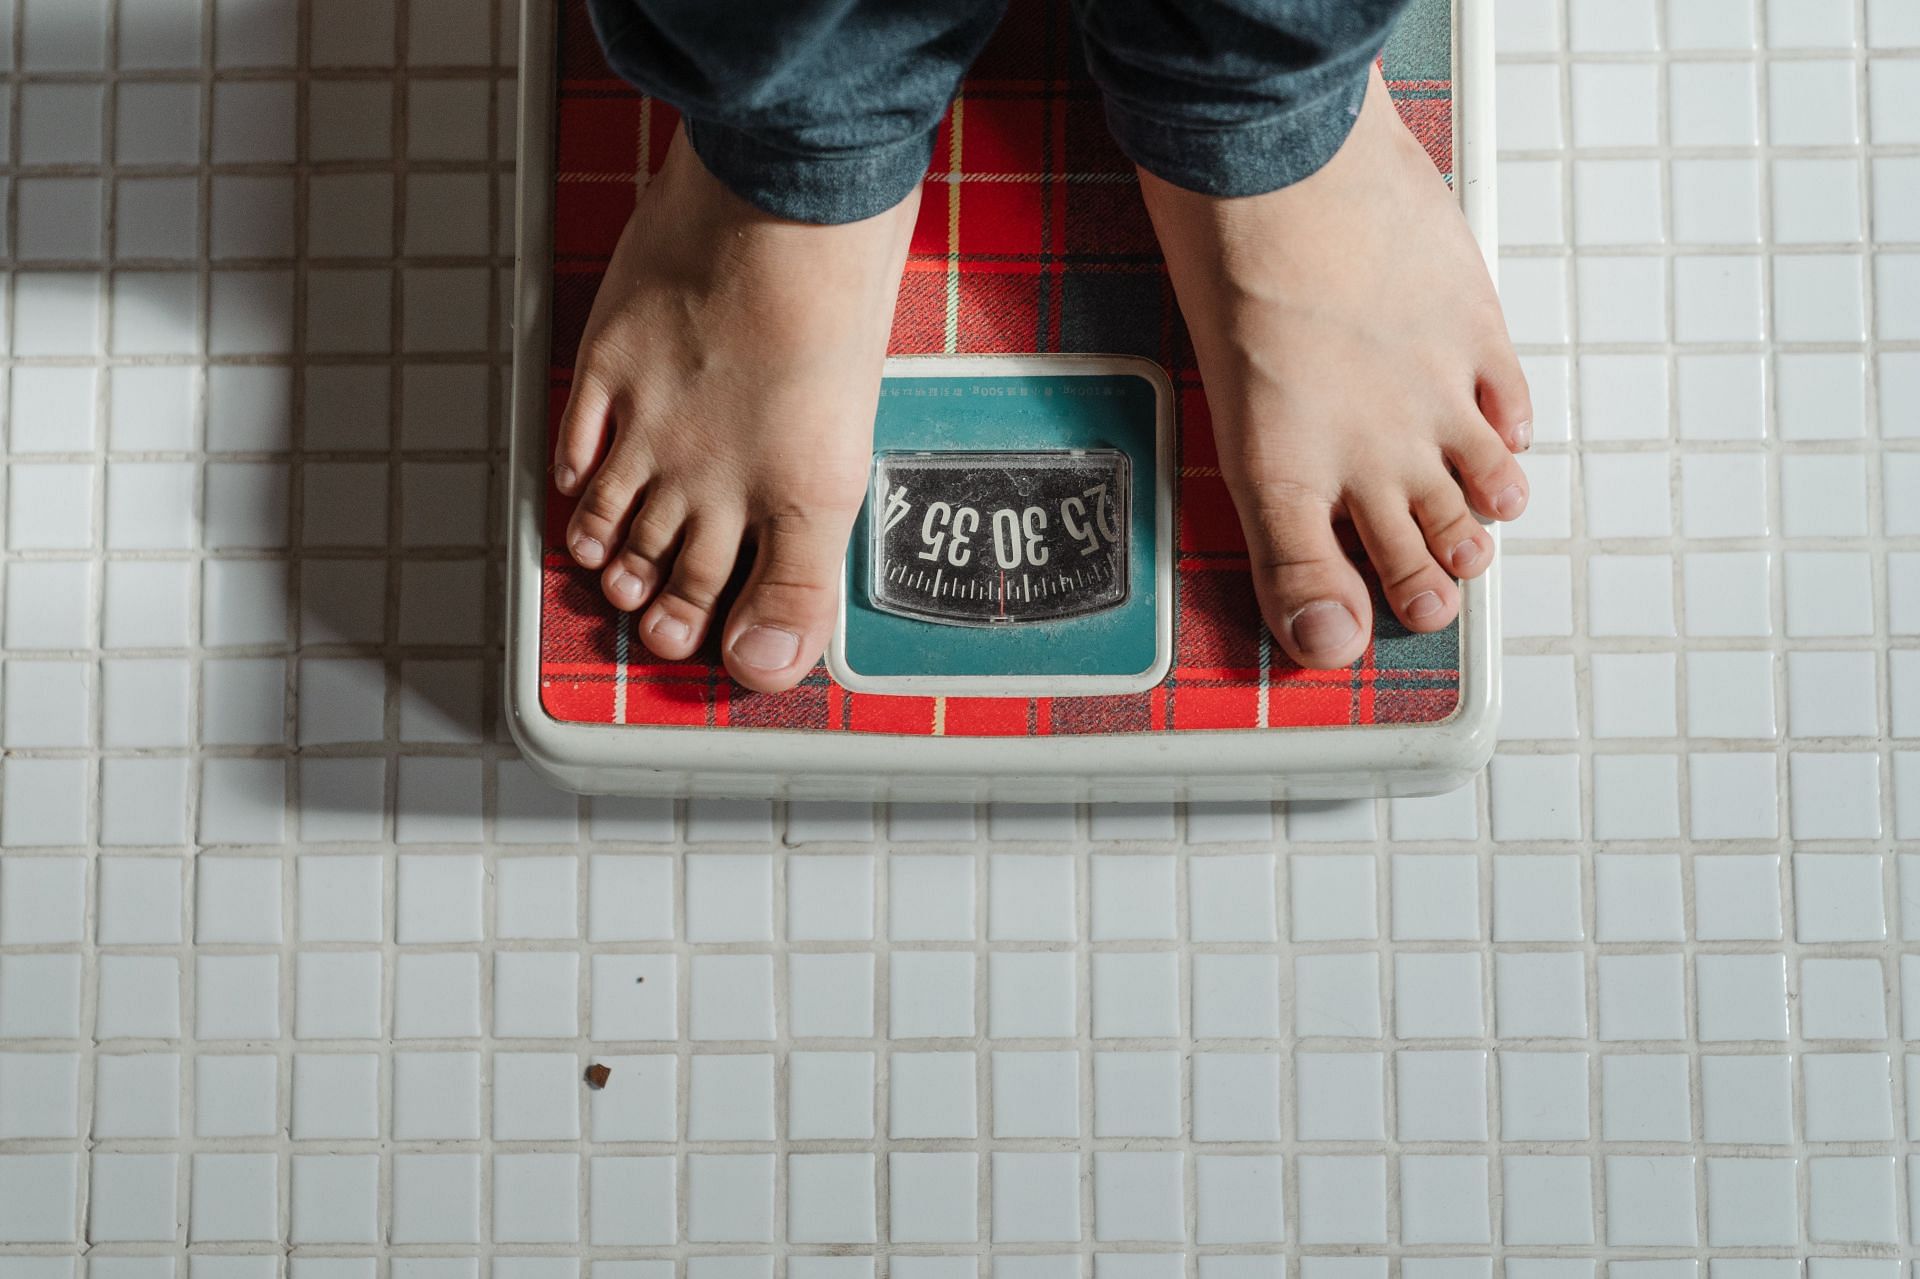 Quick ways to lose weight (Image sourced via Pexels / Photo by subiyanto)